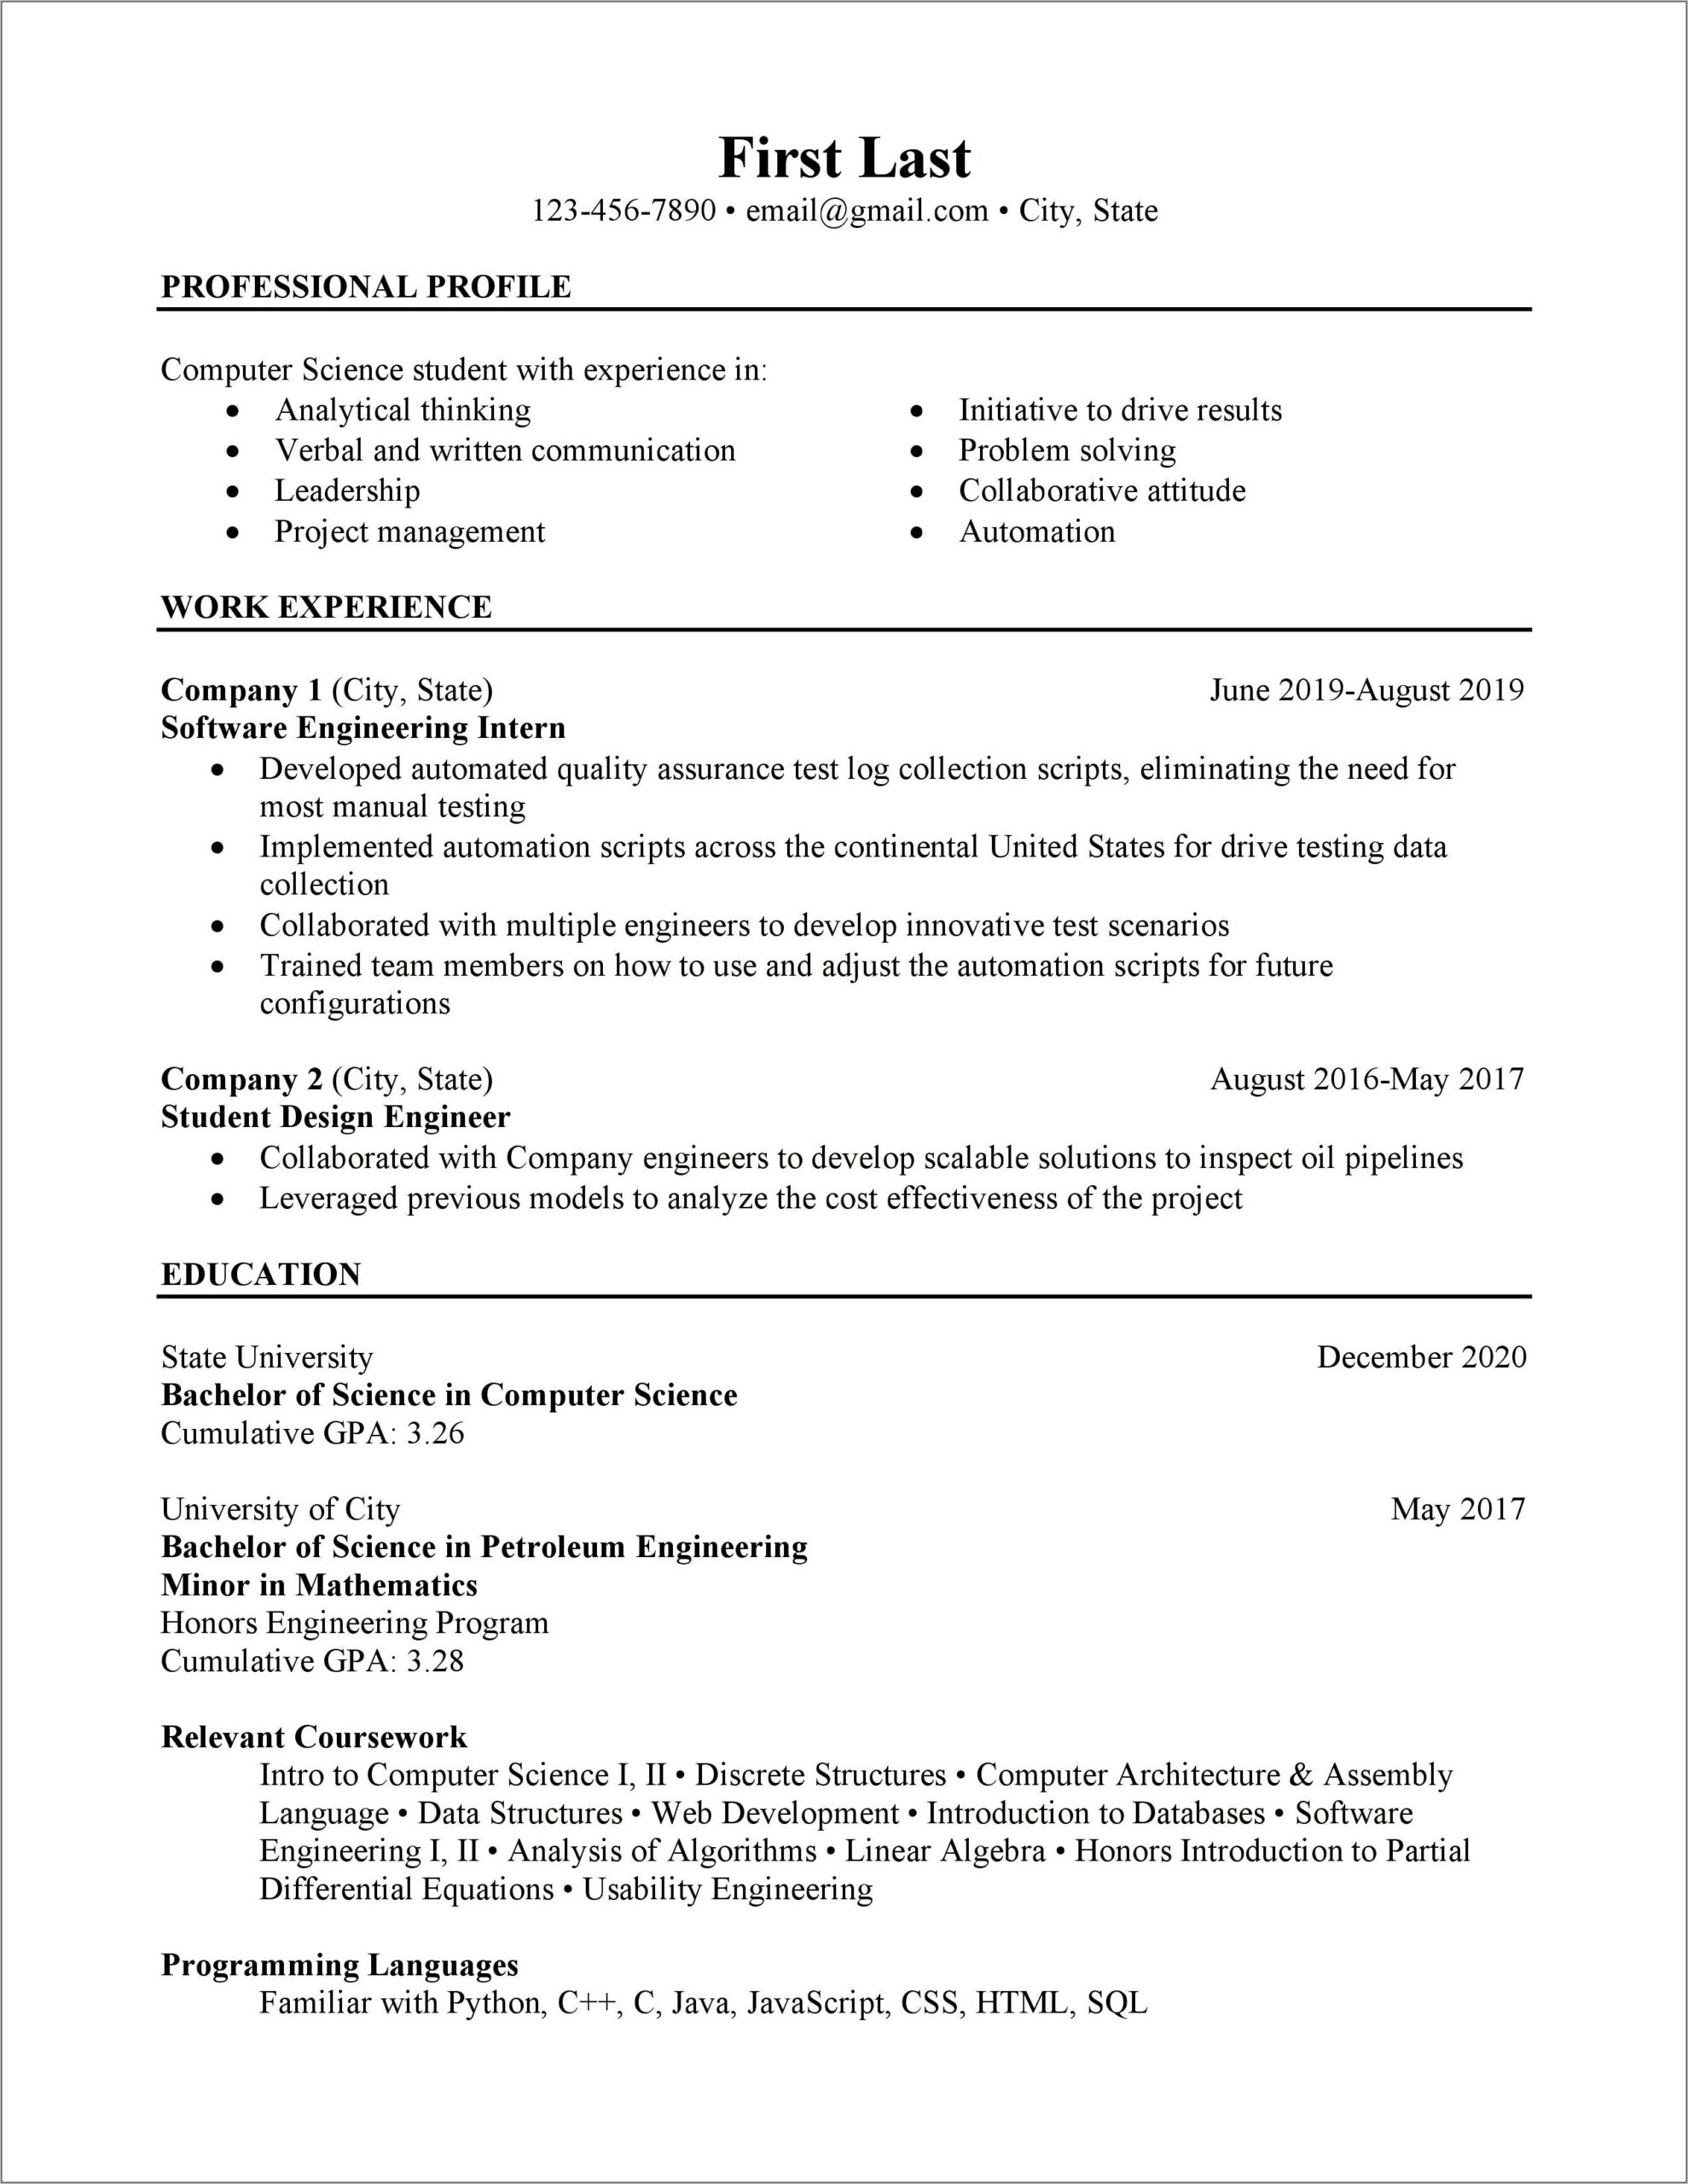 Resume Objective For Computer Science Admission